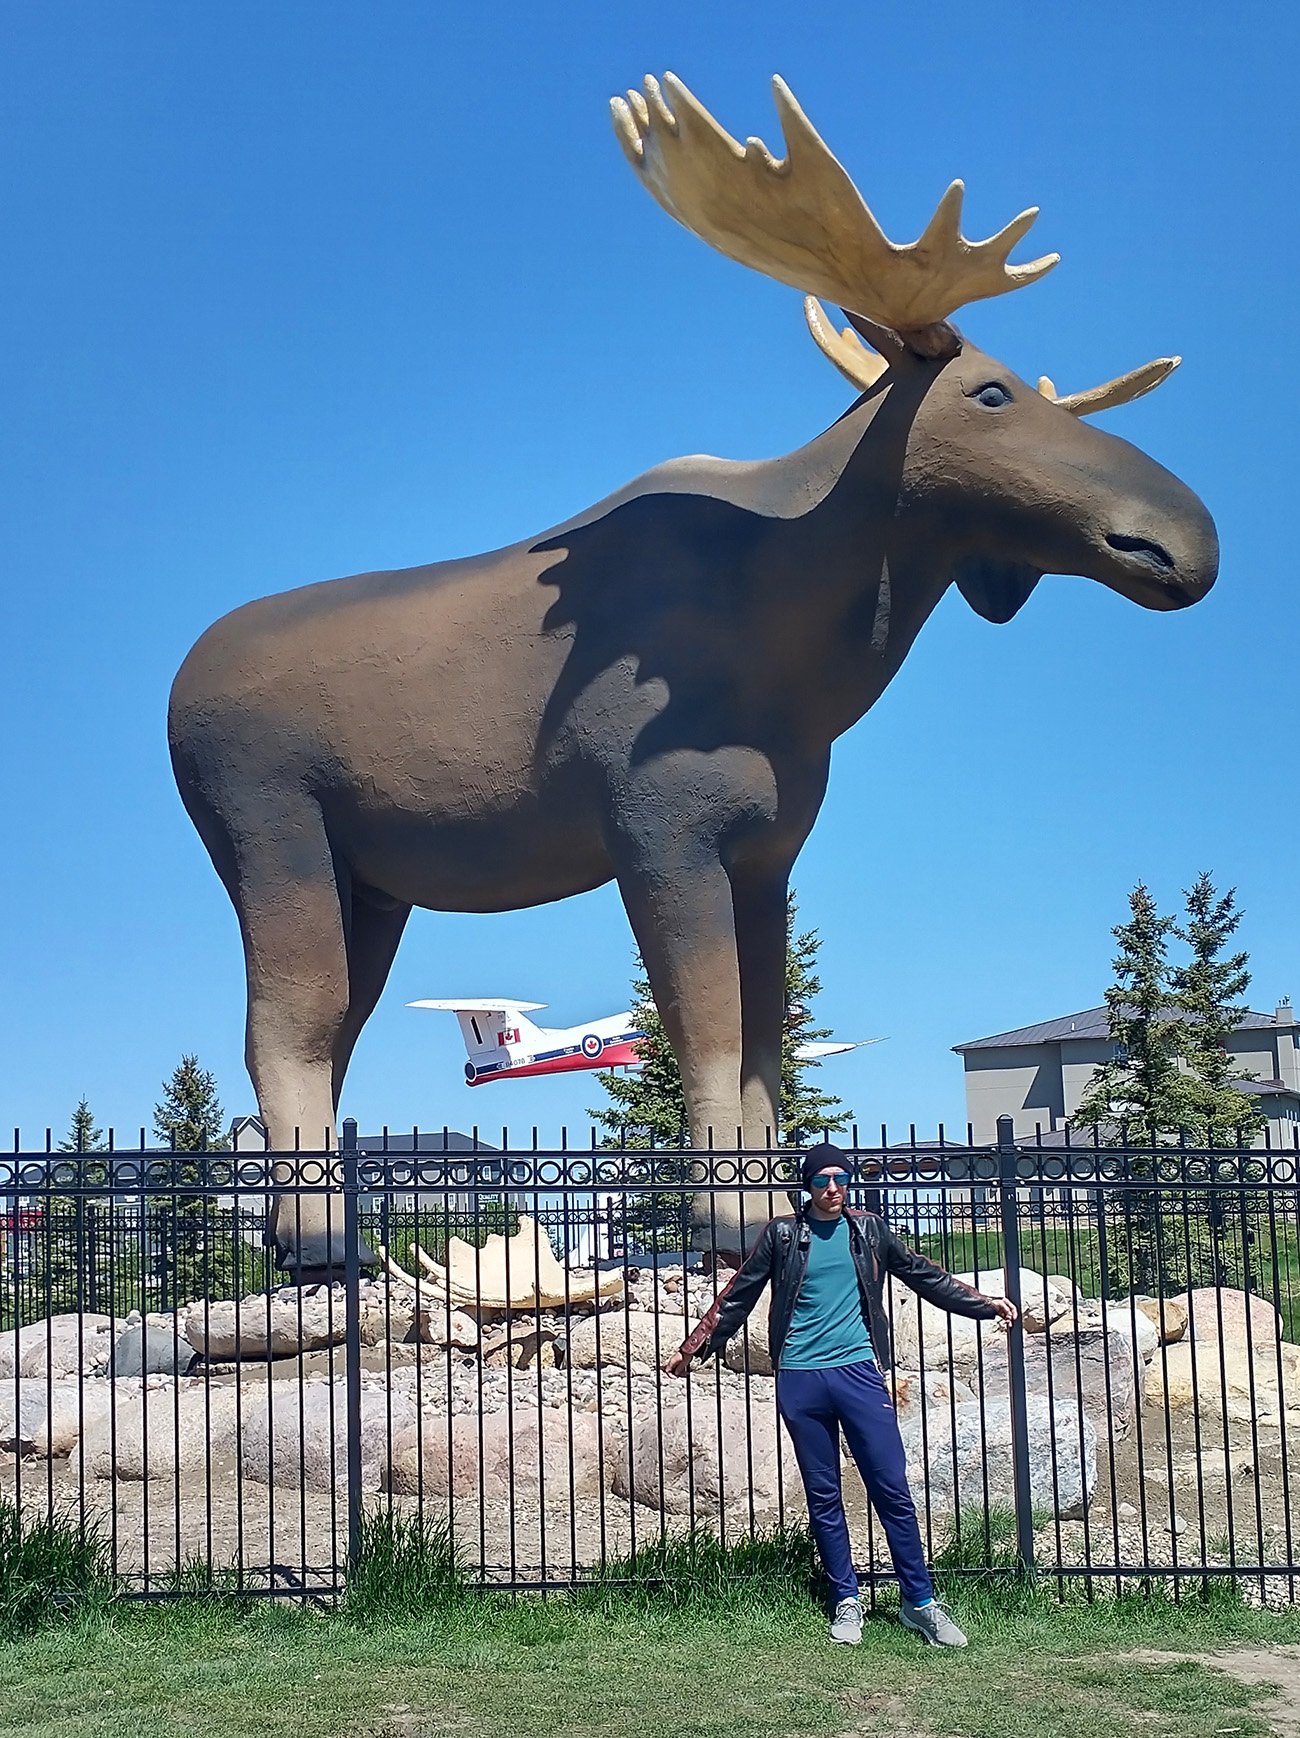 That's the Moose. What a moose it was.